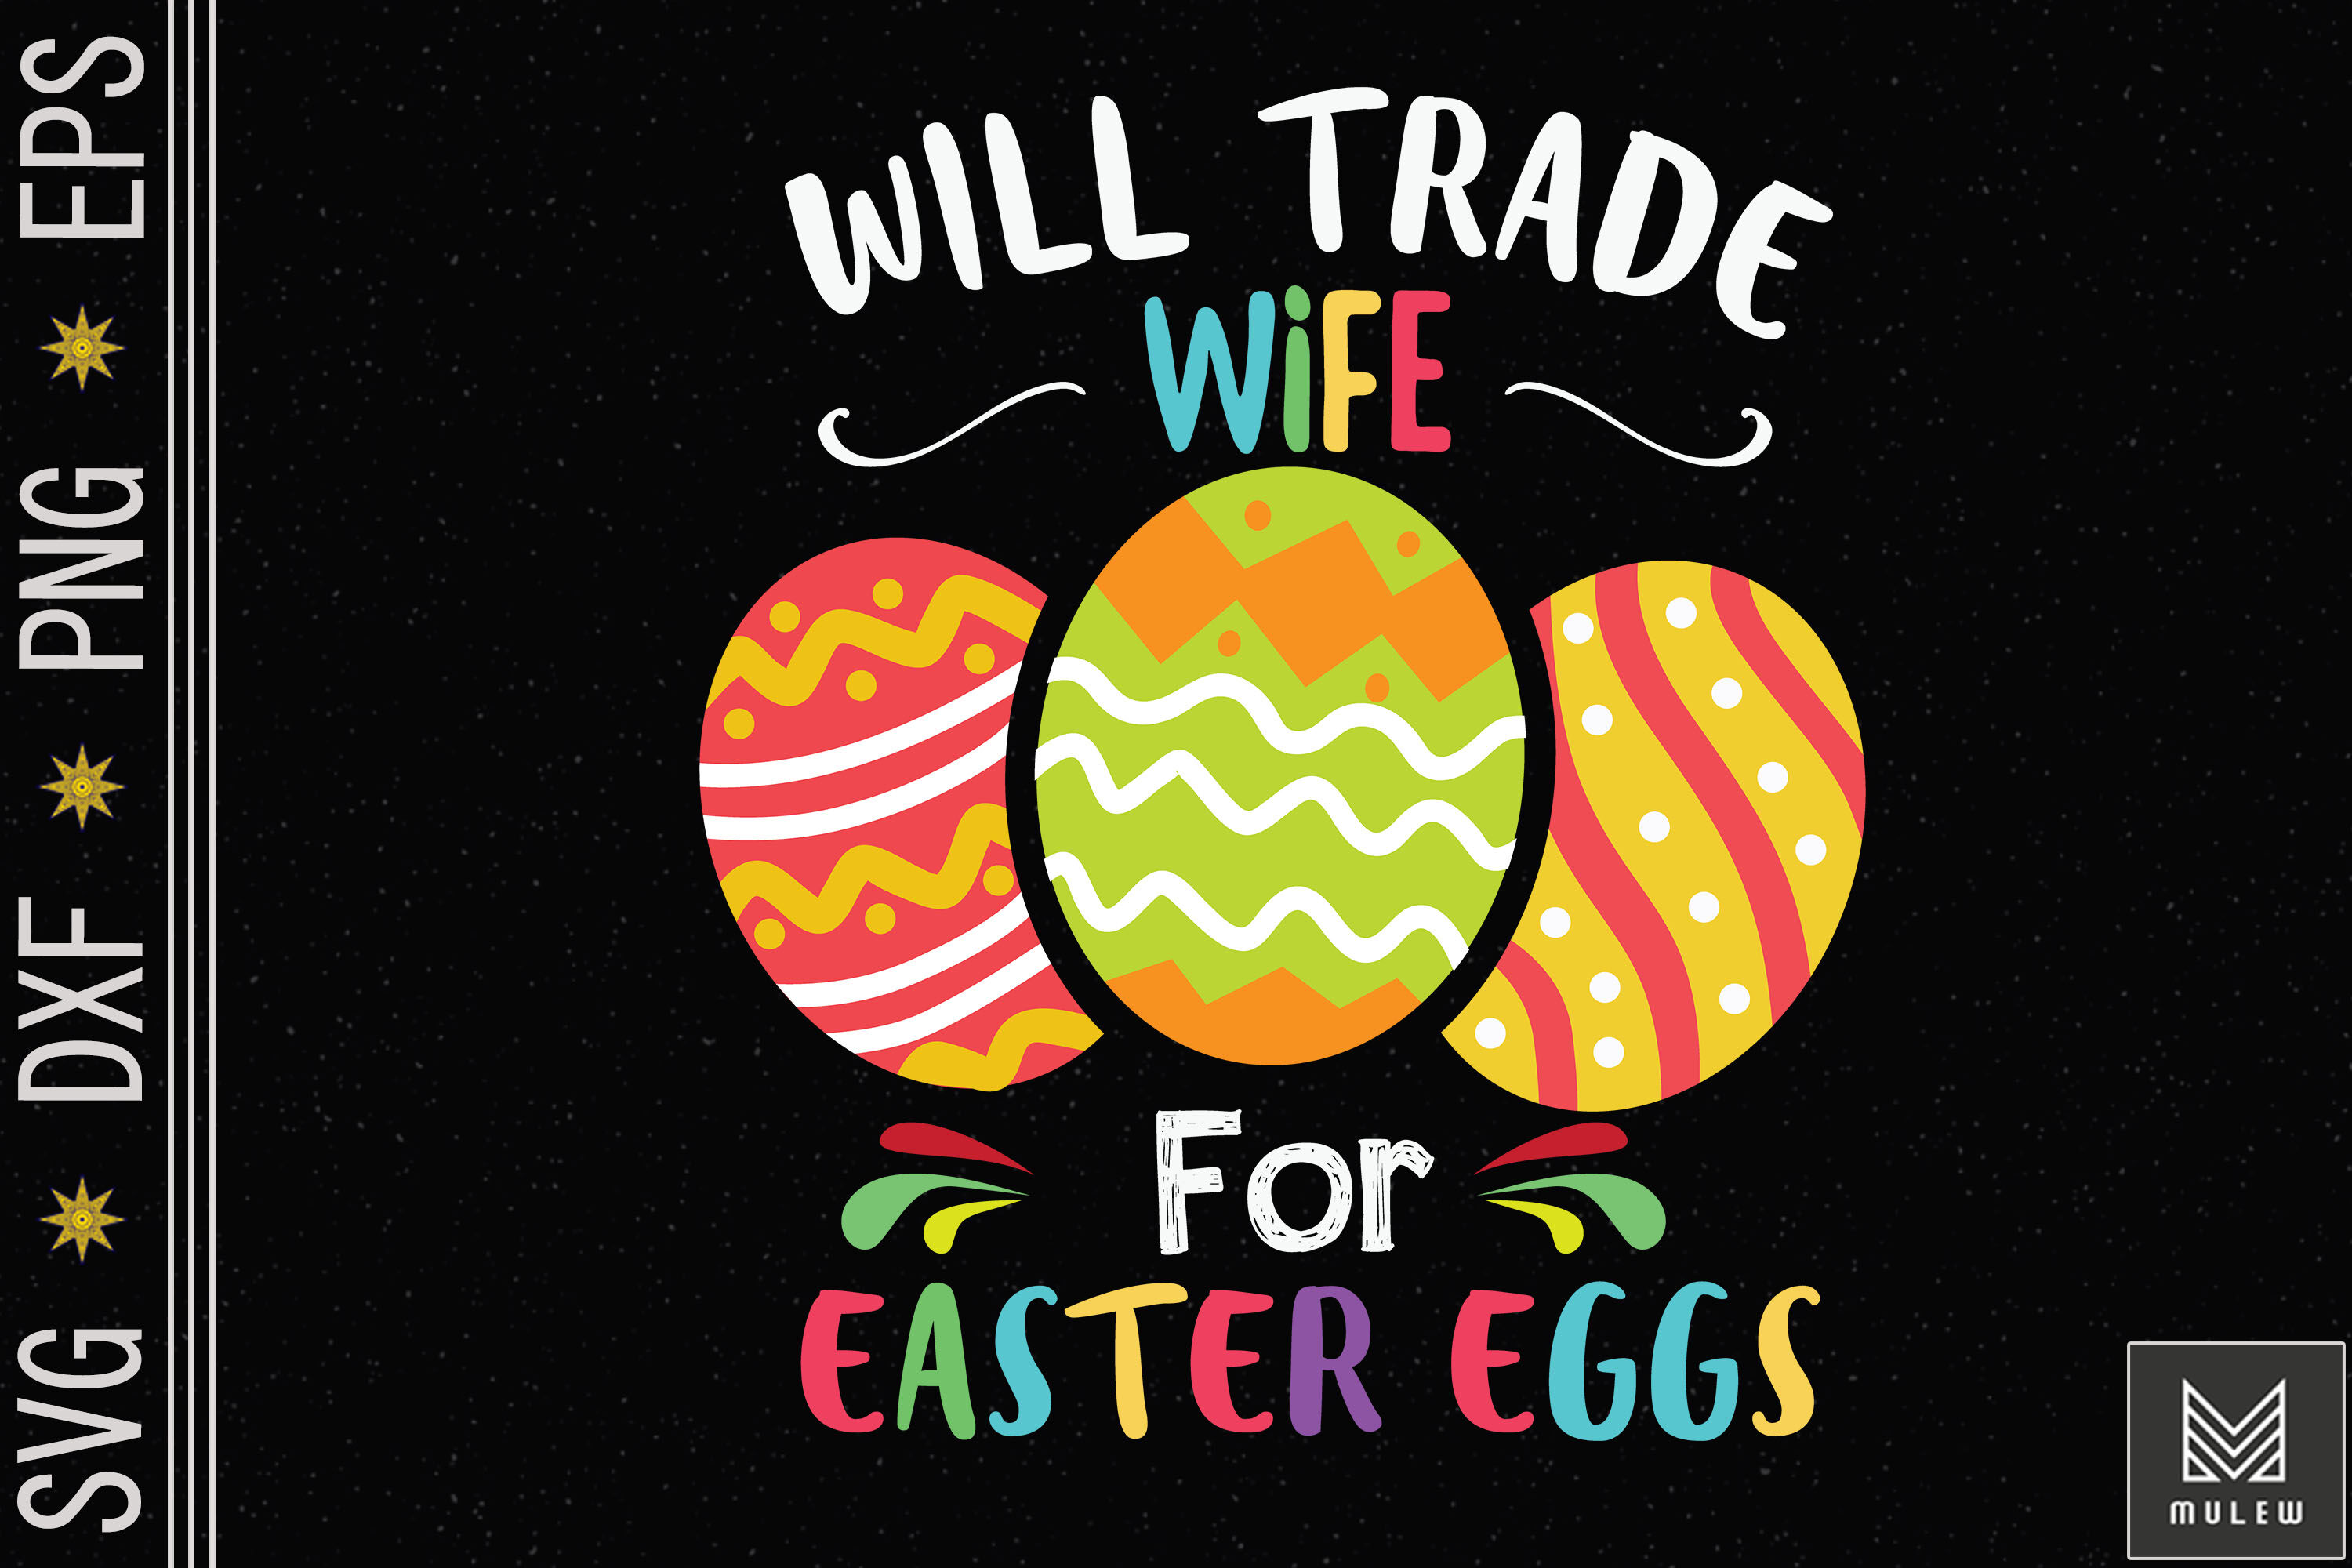 Will Trade Wife For Easter Eggs By Mulew Art TheHungryJPEG